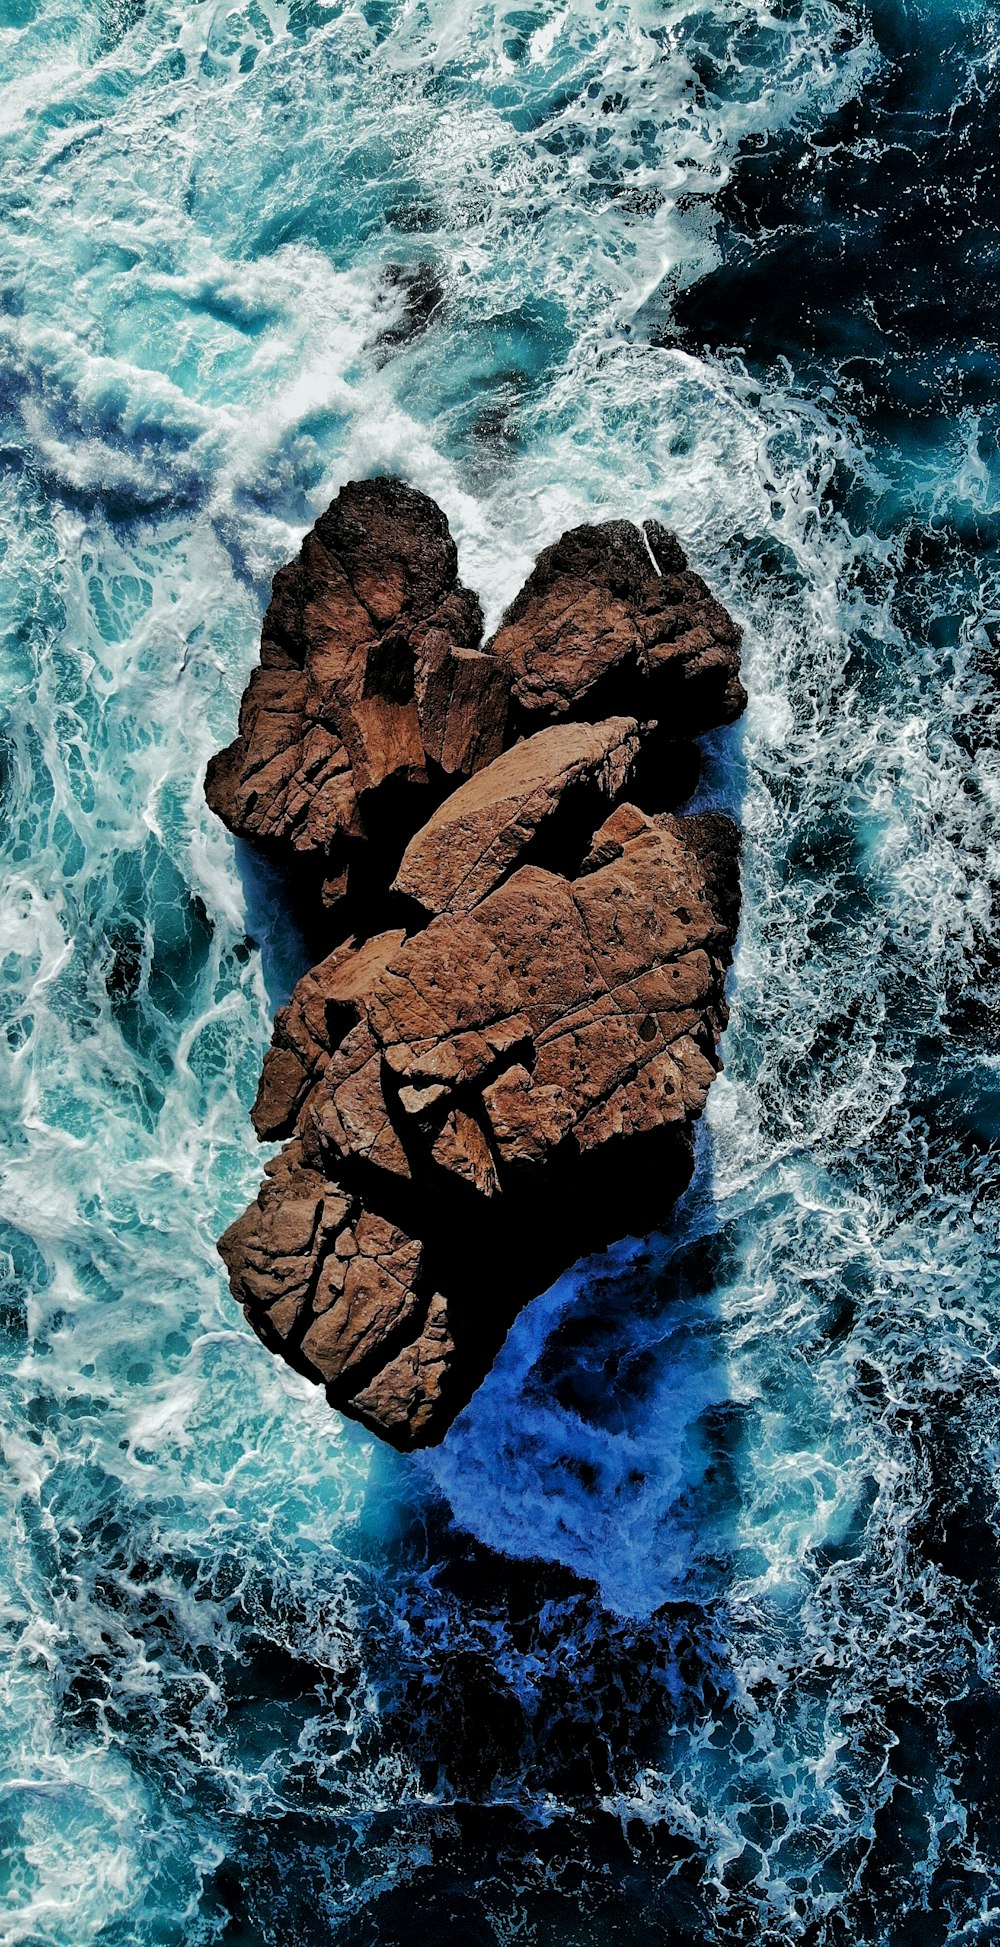 brown rock formation on body of water